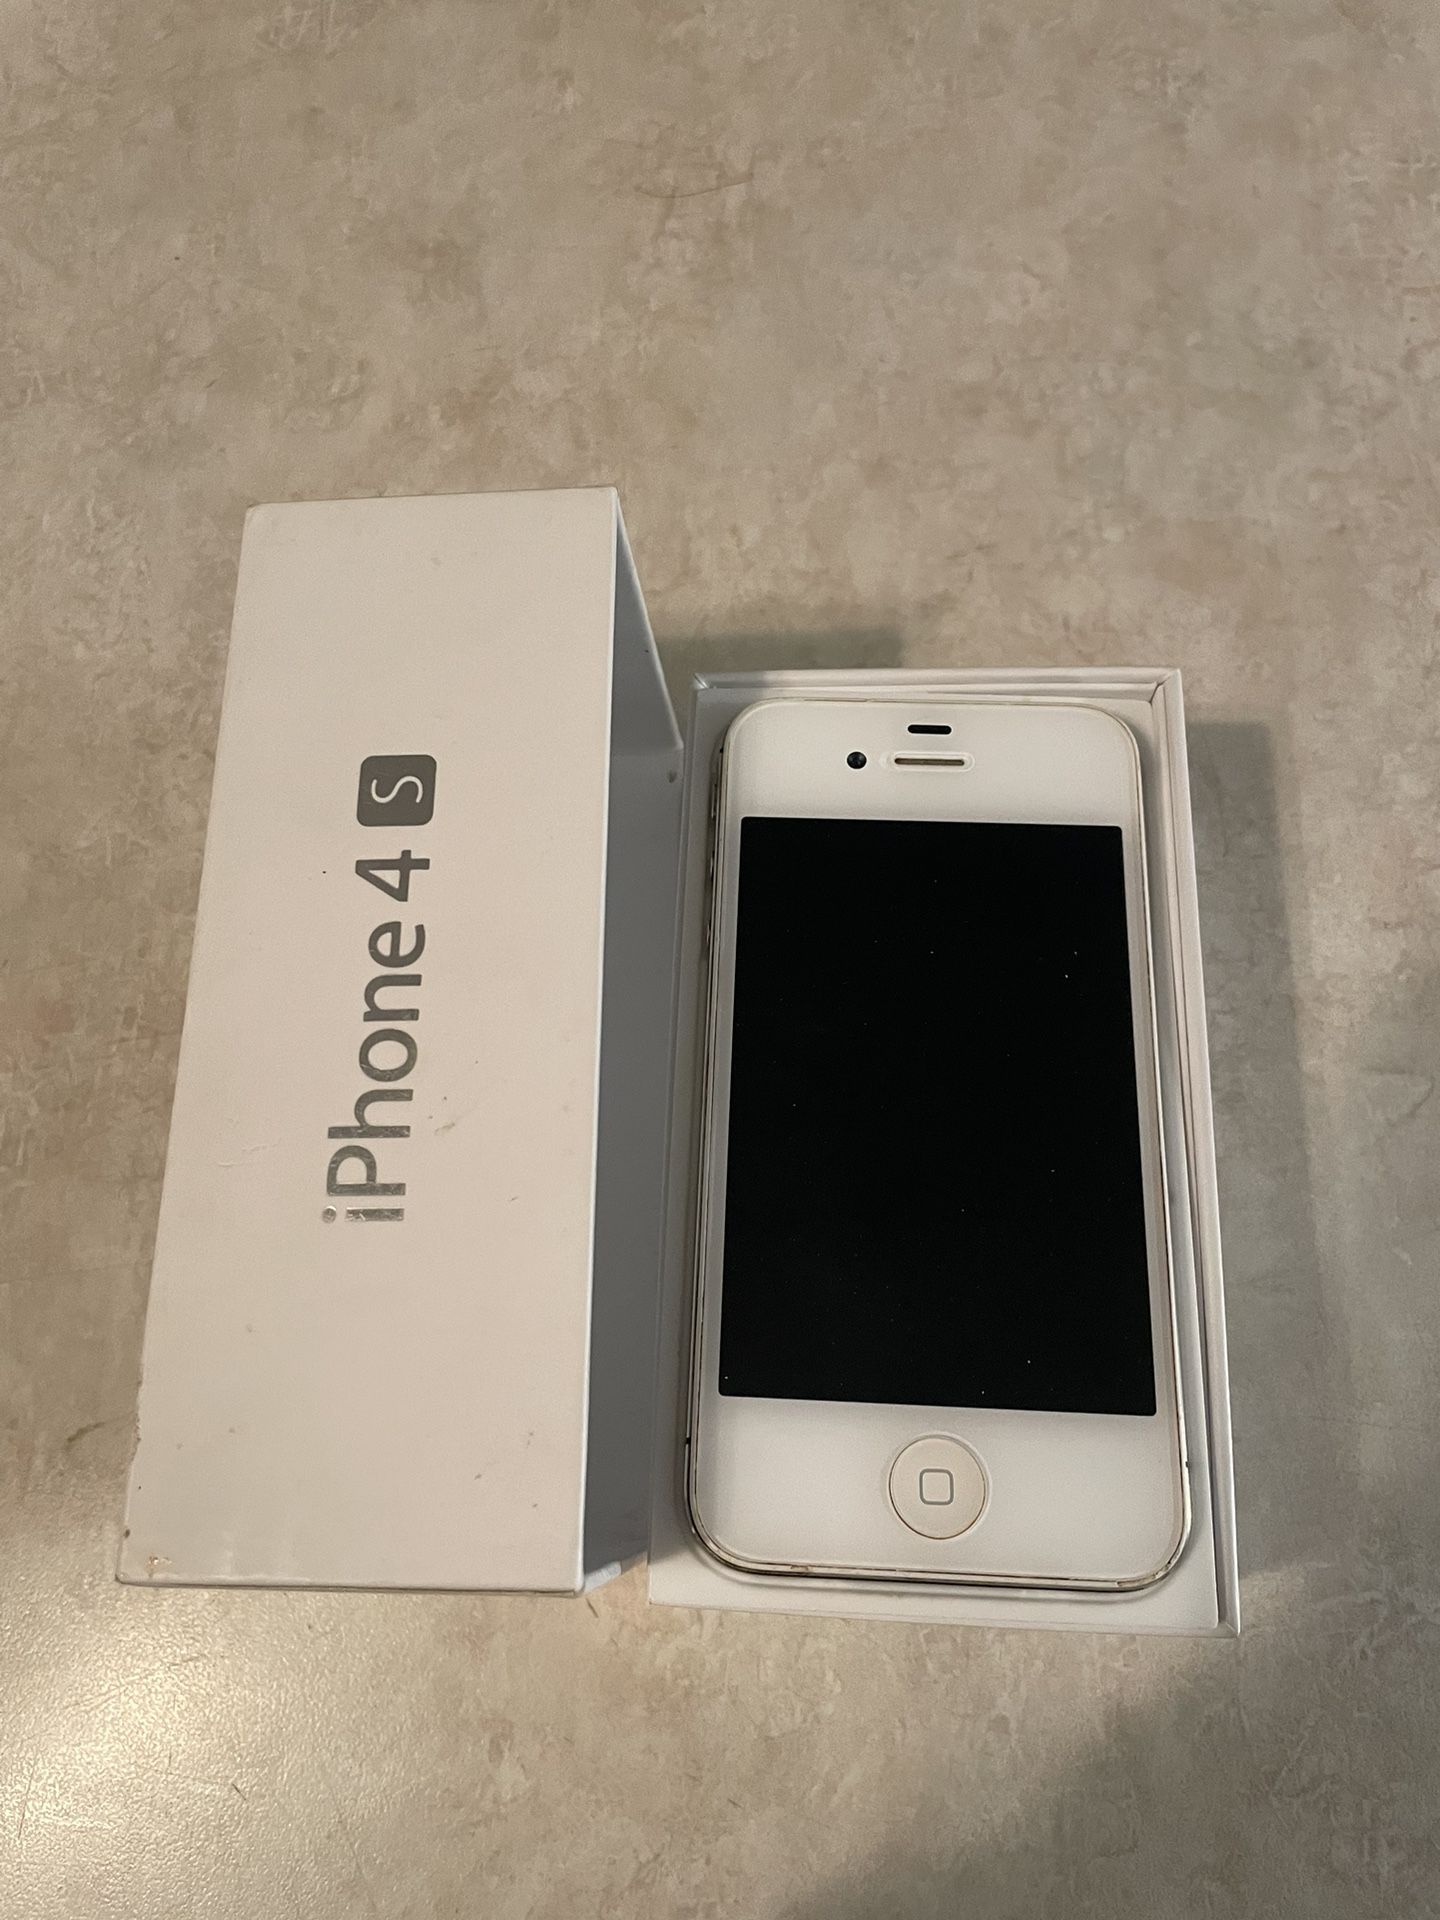 iPhone 4s In The Original Box With Accessories